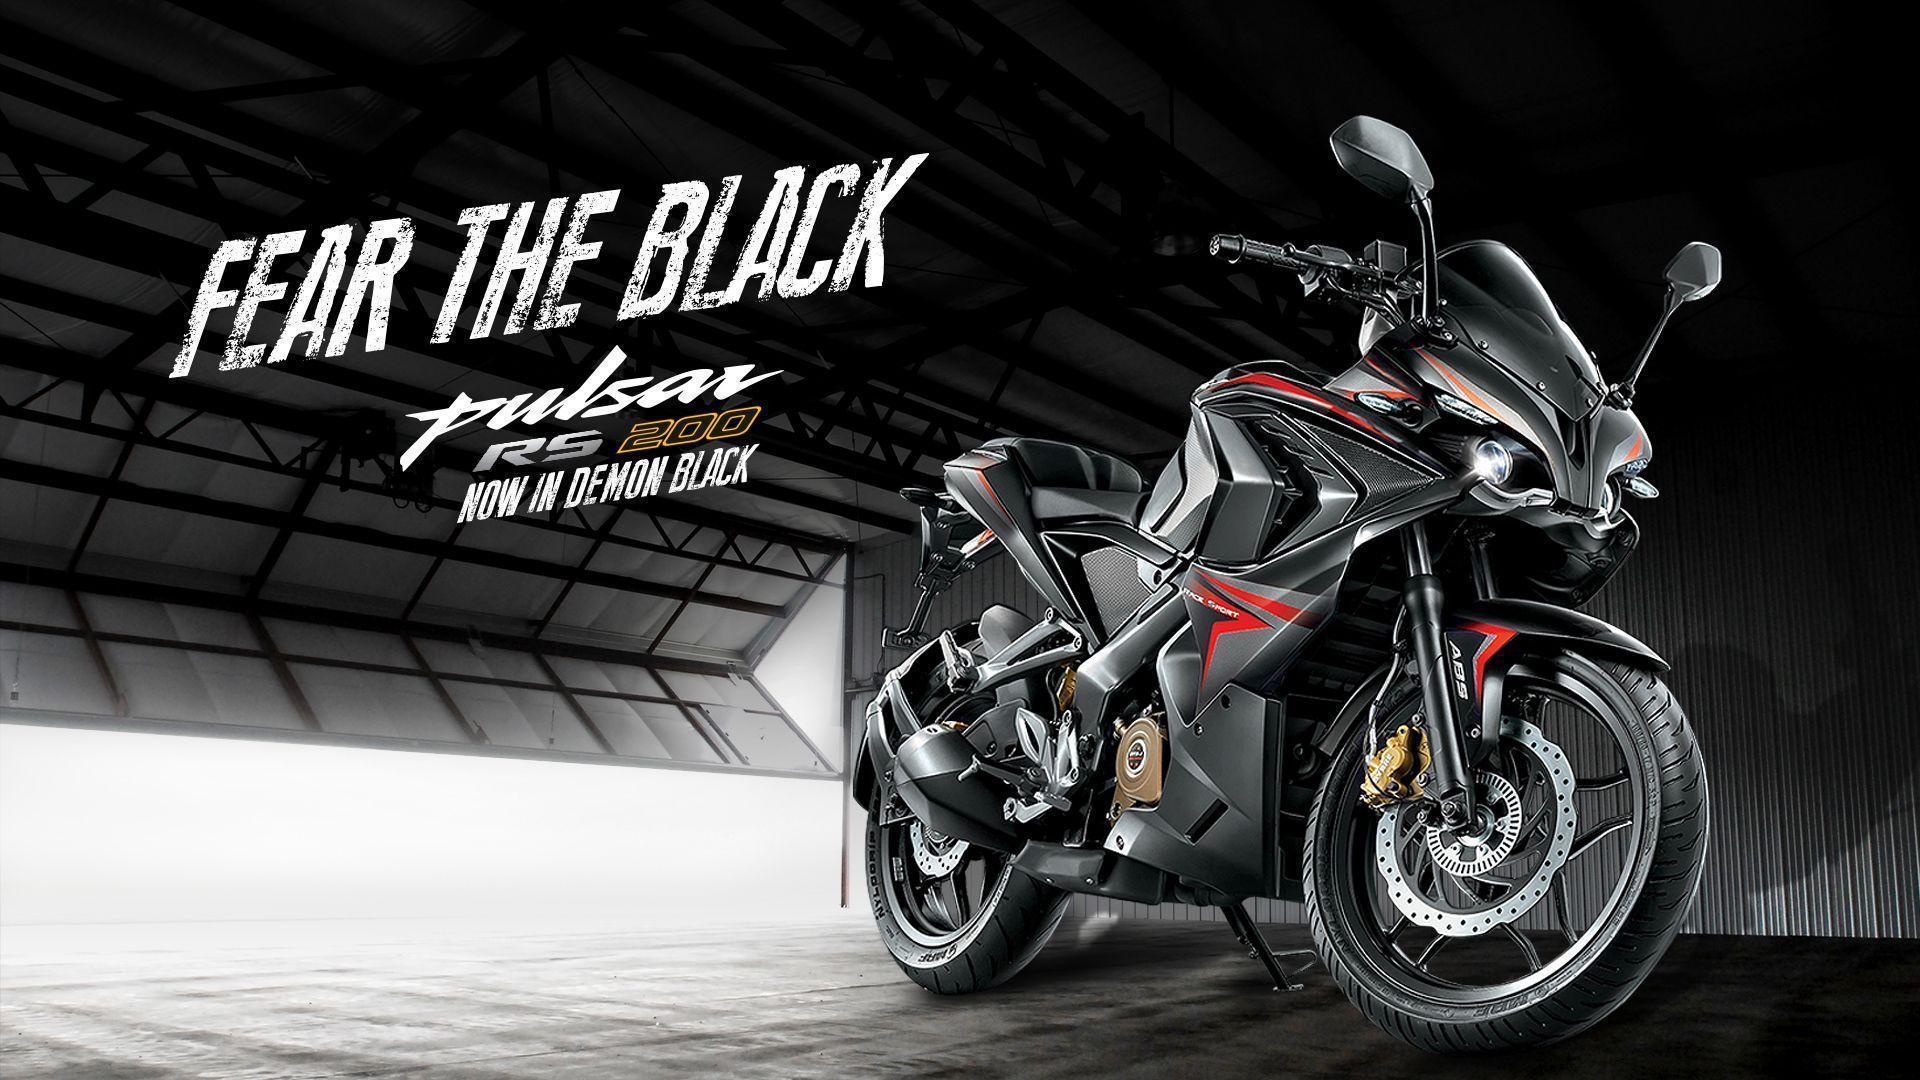 Fear the Black Pulsar RS200 is now available in 'Demon